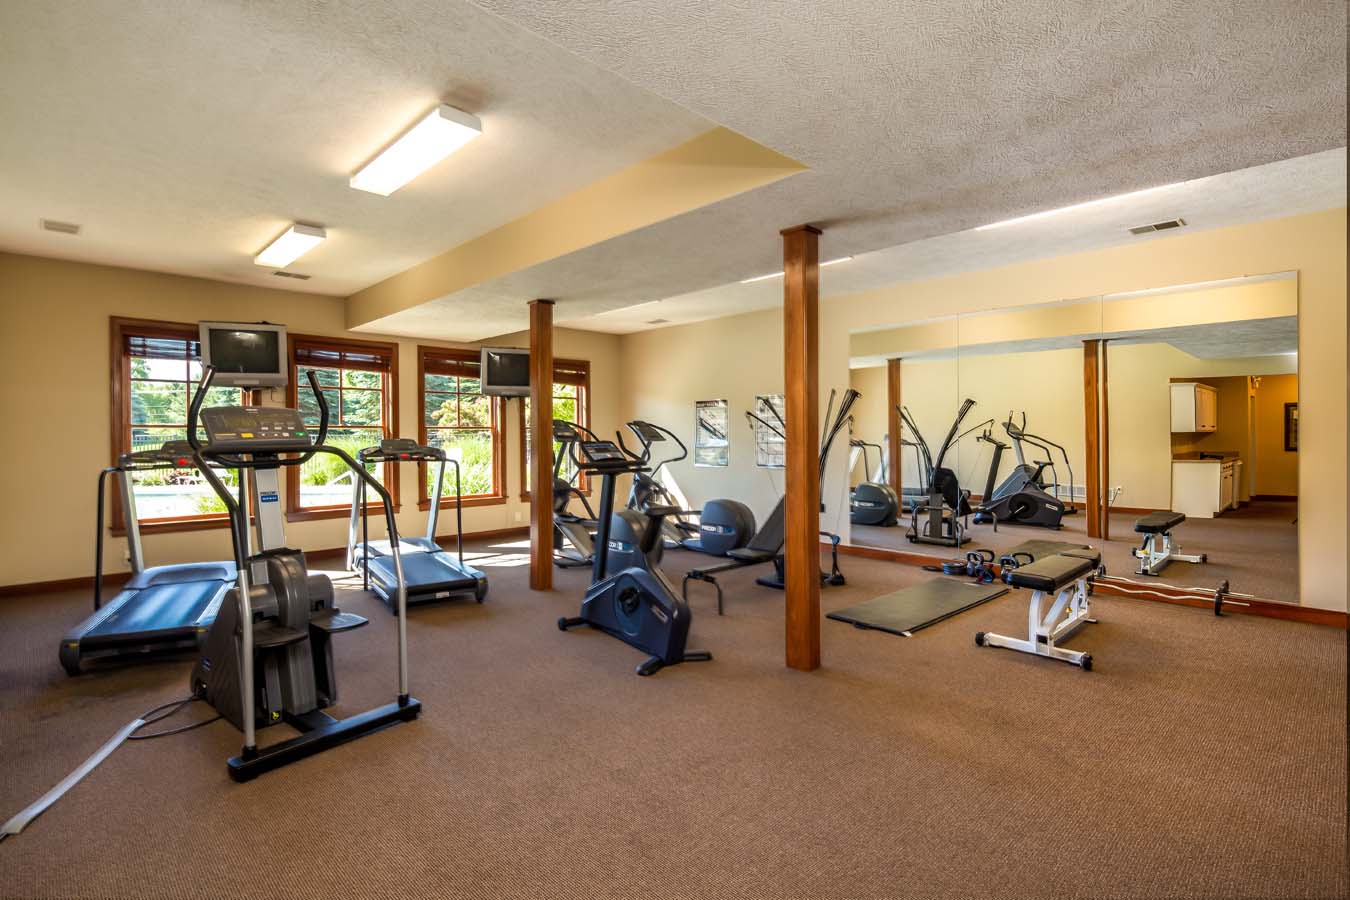 Fitness center in lower level of Crowner Farms community center